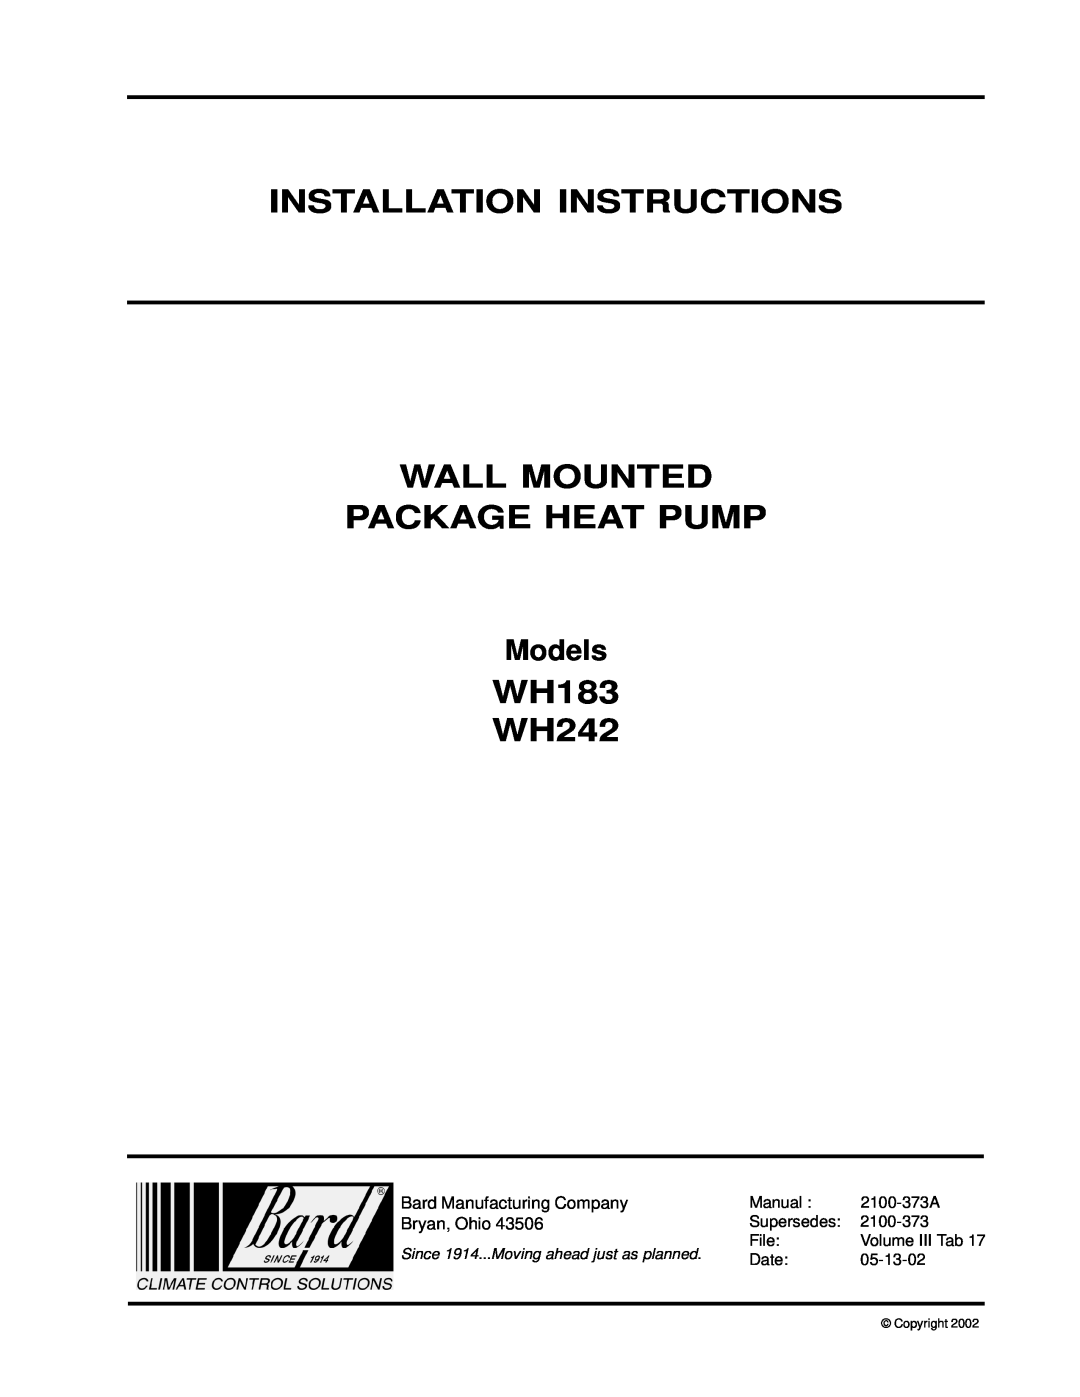 Bard installation instructions Installation Instructions Wall Mounted, Package Heat Pump, WH183 WH242, Models 